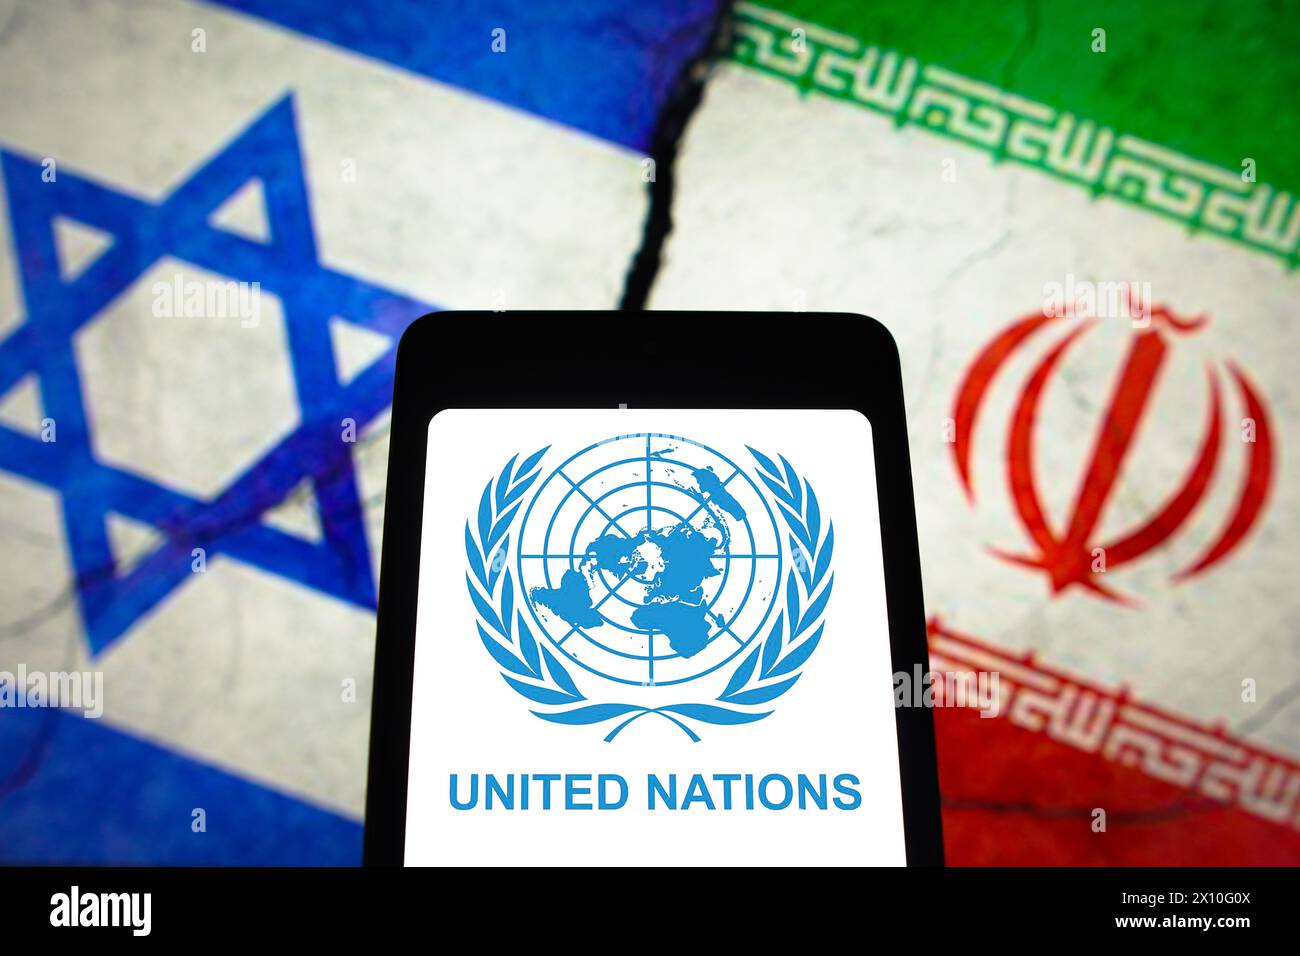 In this photo illustration, the United Nations (UN) logo is displayed on a smartphone screen and flags of Israel and Iran in the background. Stock Photo